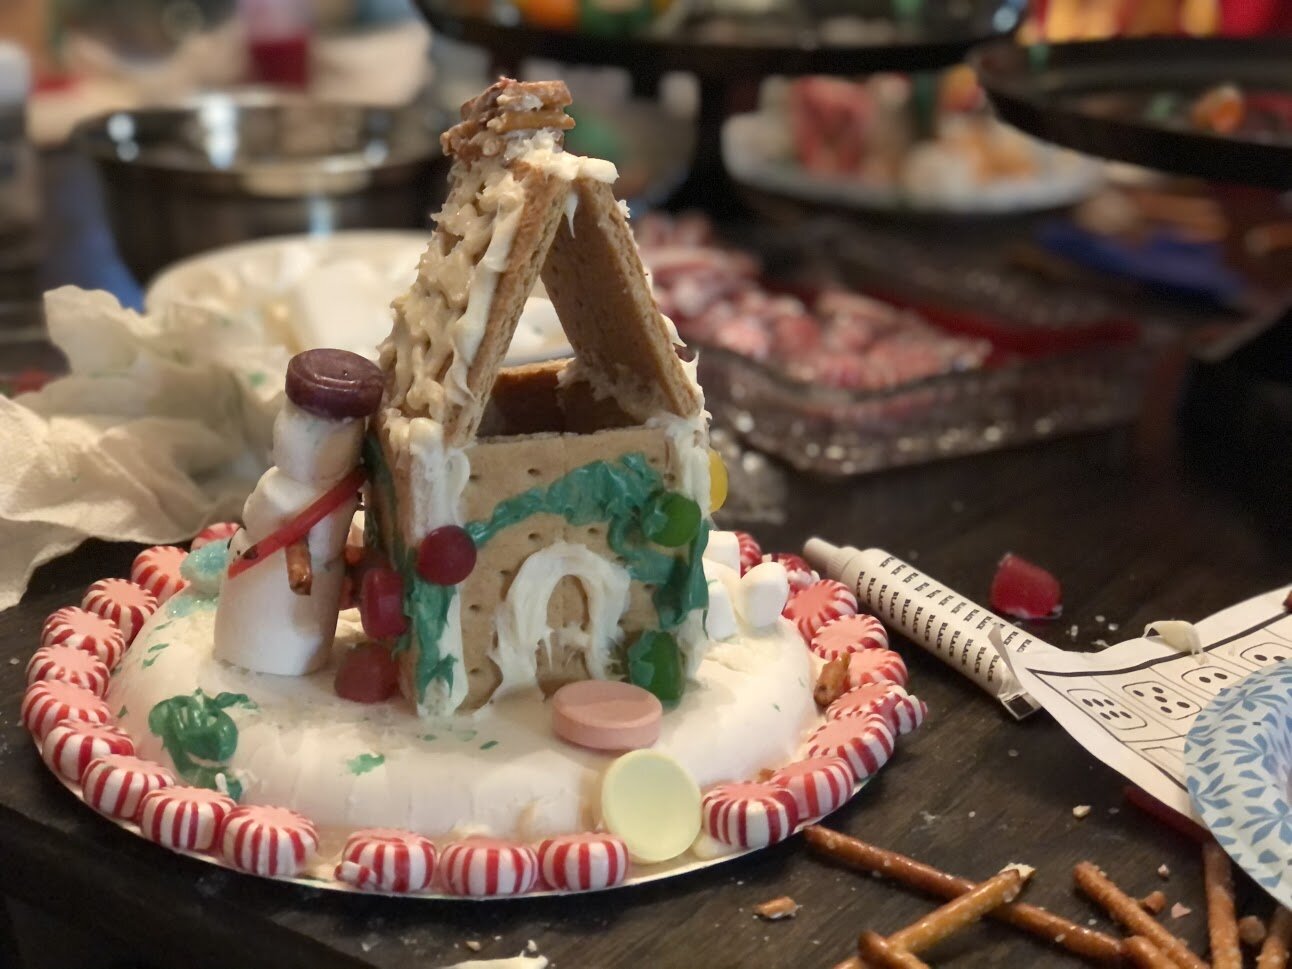 Kid friendly gingerbread house decorating party using graham crackers. How to have a stress free Christmas tradition party with your kids. Decorating gingerbread houses as a family. How to make easy gingerbread houses for kids.